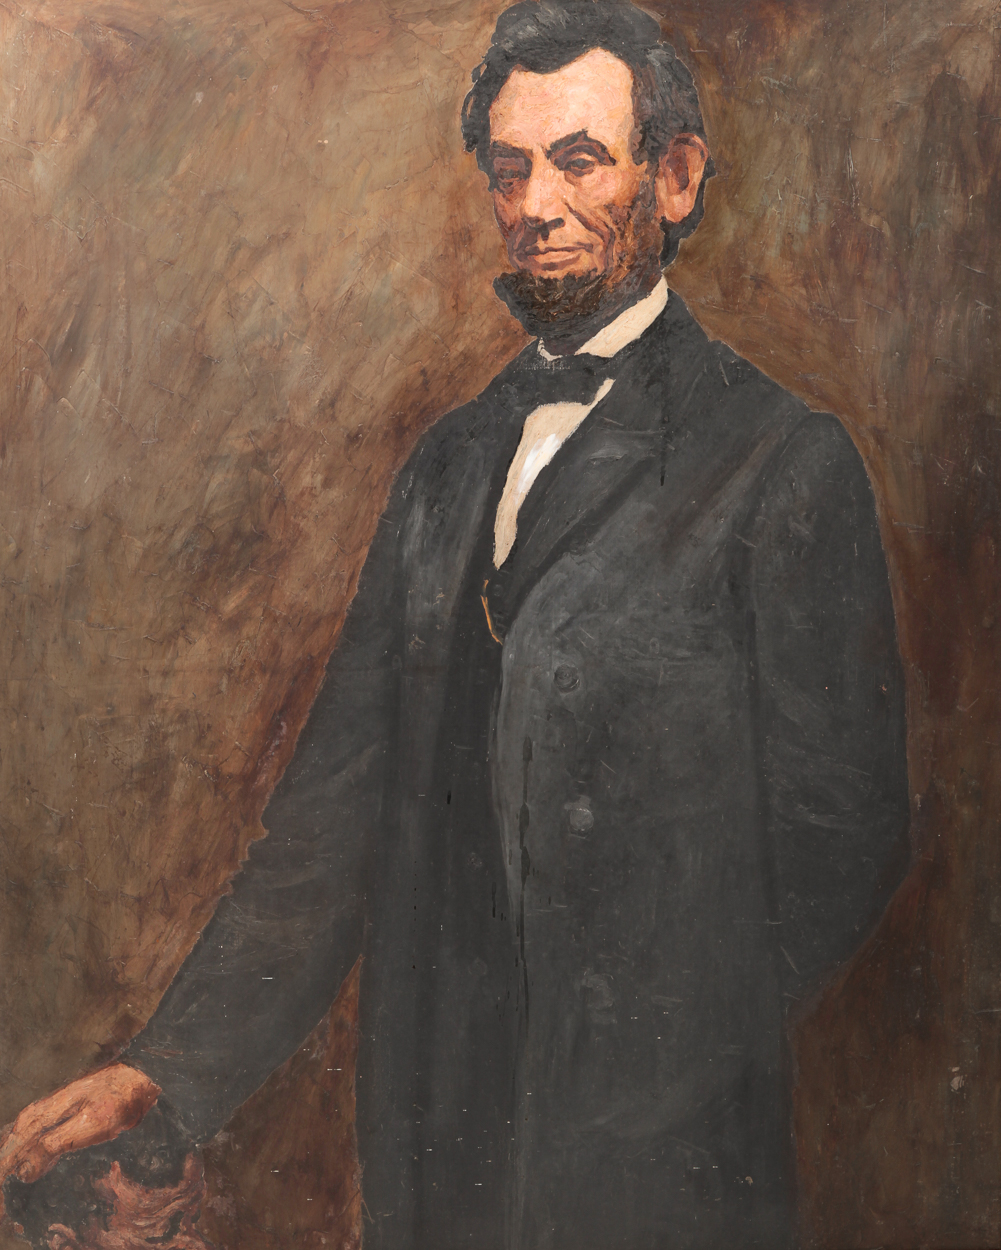 ABRAHAM LINCOLN BY ROBERT BOLLING